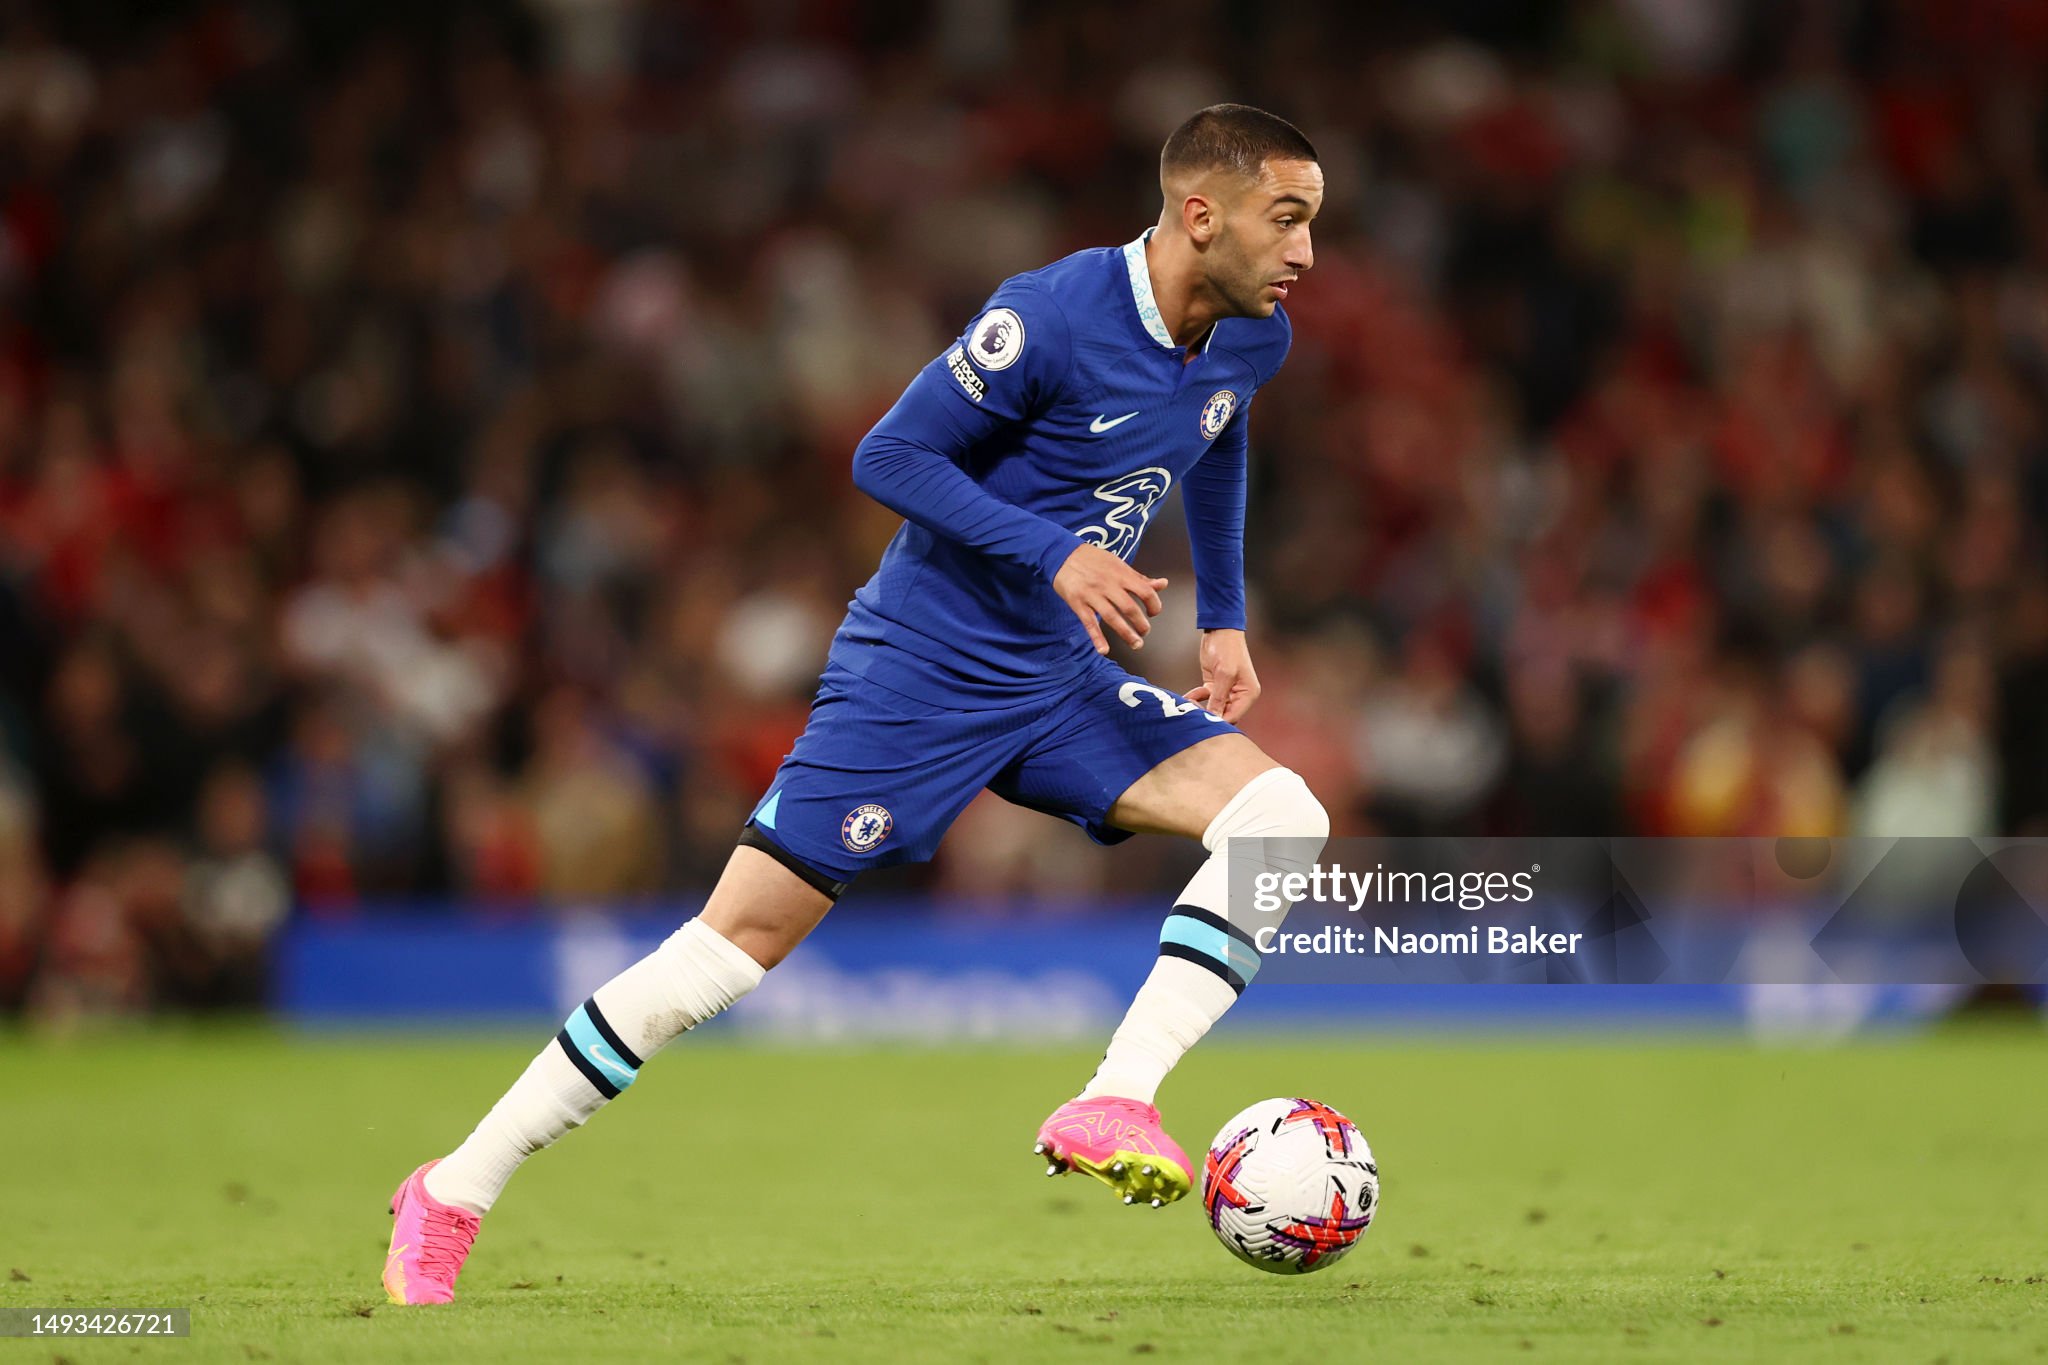 Chelsea flop latest to be offered Saudi Arabia escape route